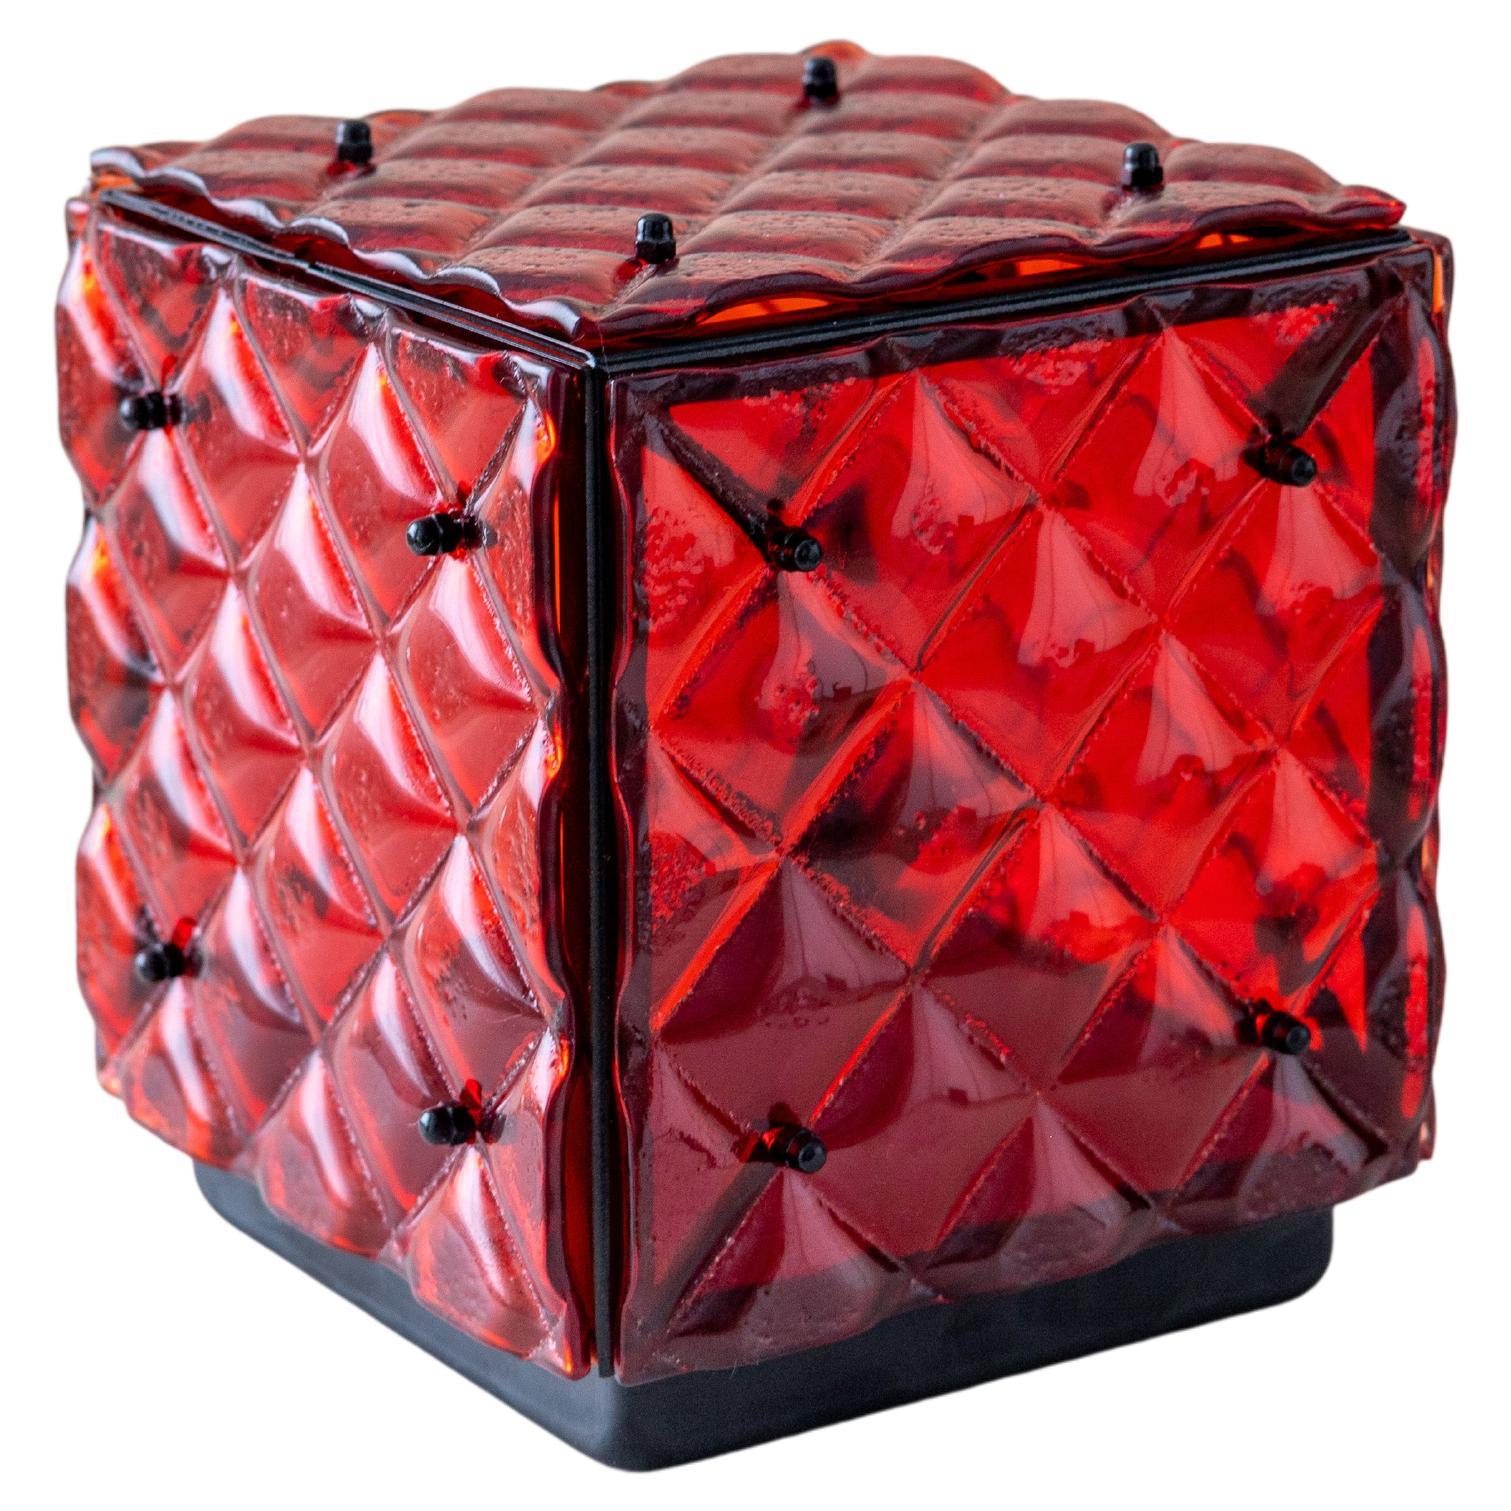 Glass Cube Lamp Red Ambient Light Artisanal Fused Glass Contemporary Design For Sale